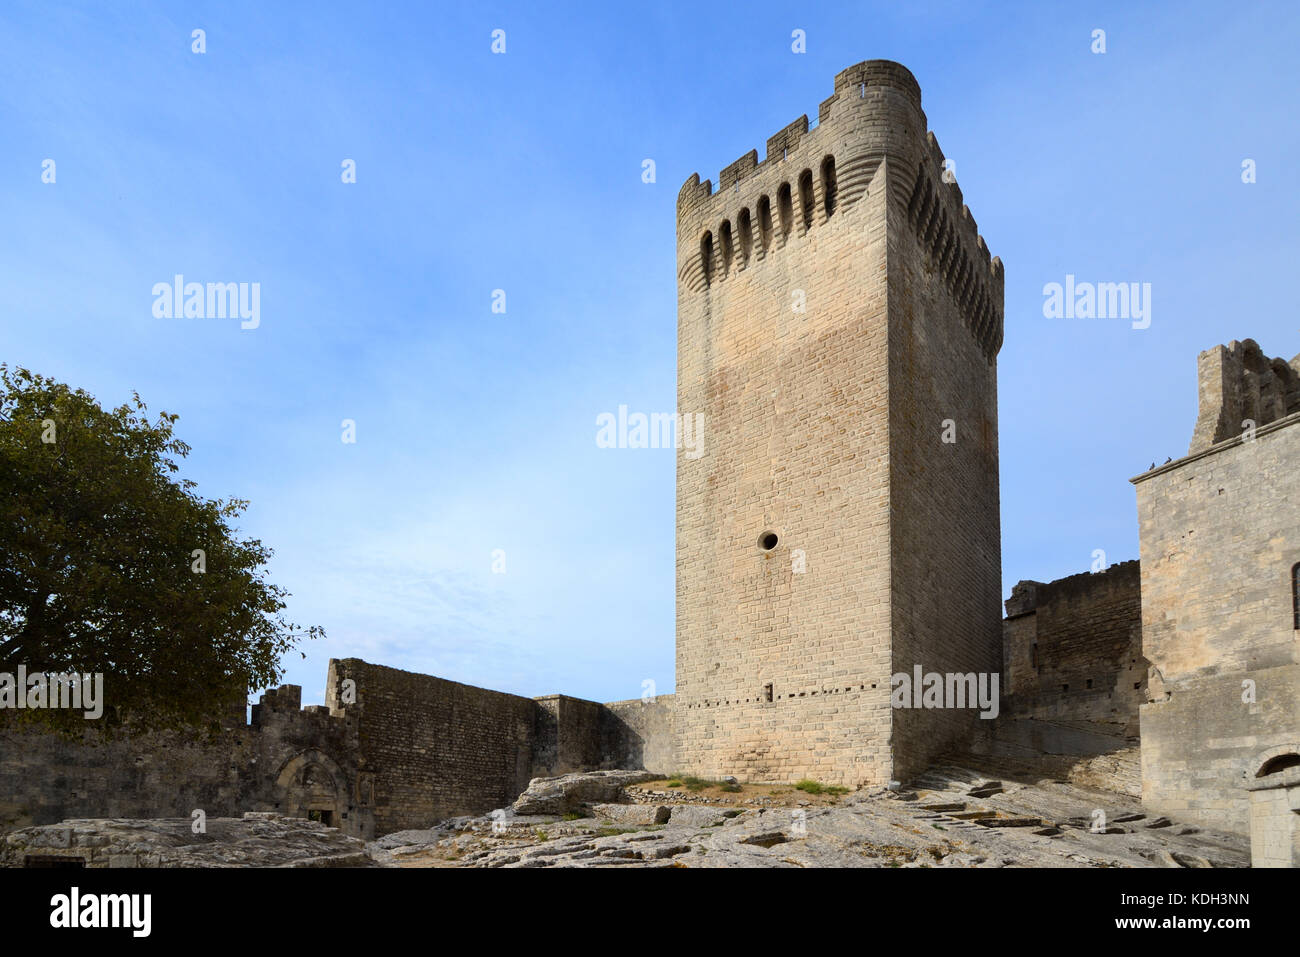 Medieval Tower of Abbot Pons de l'Orme (c14th) Montmajour Abbey, near Arles, Provence France Stock Photo